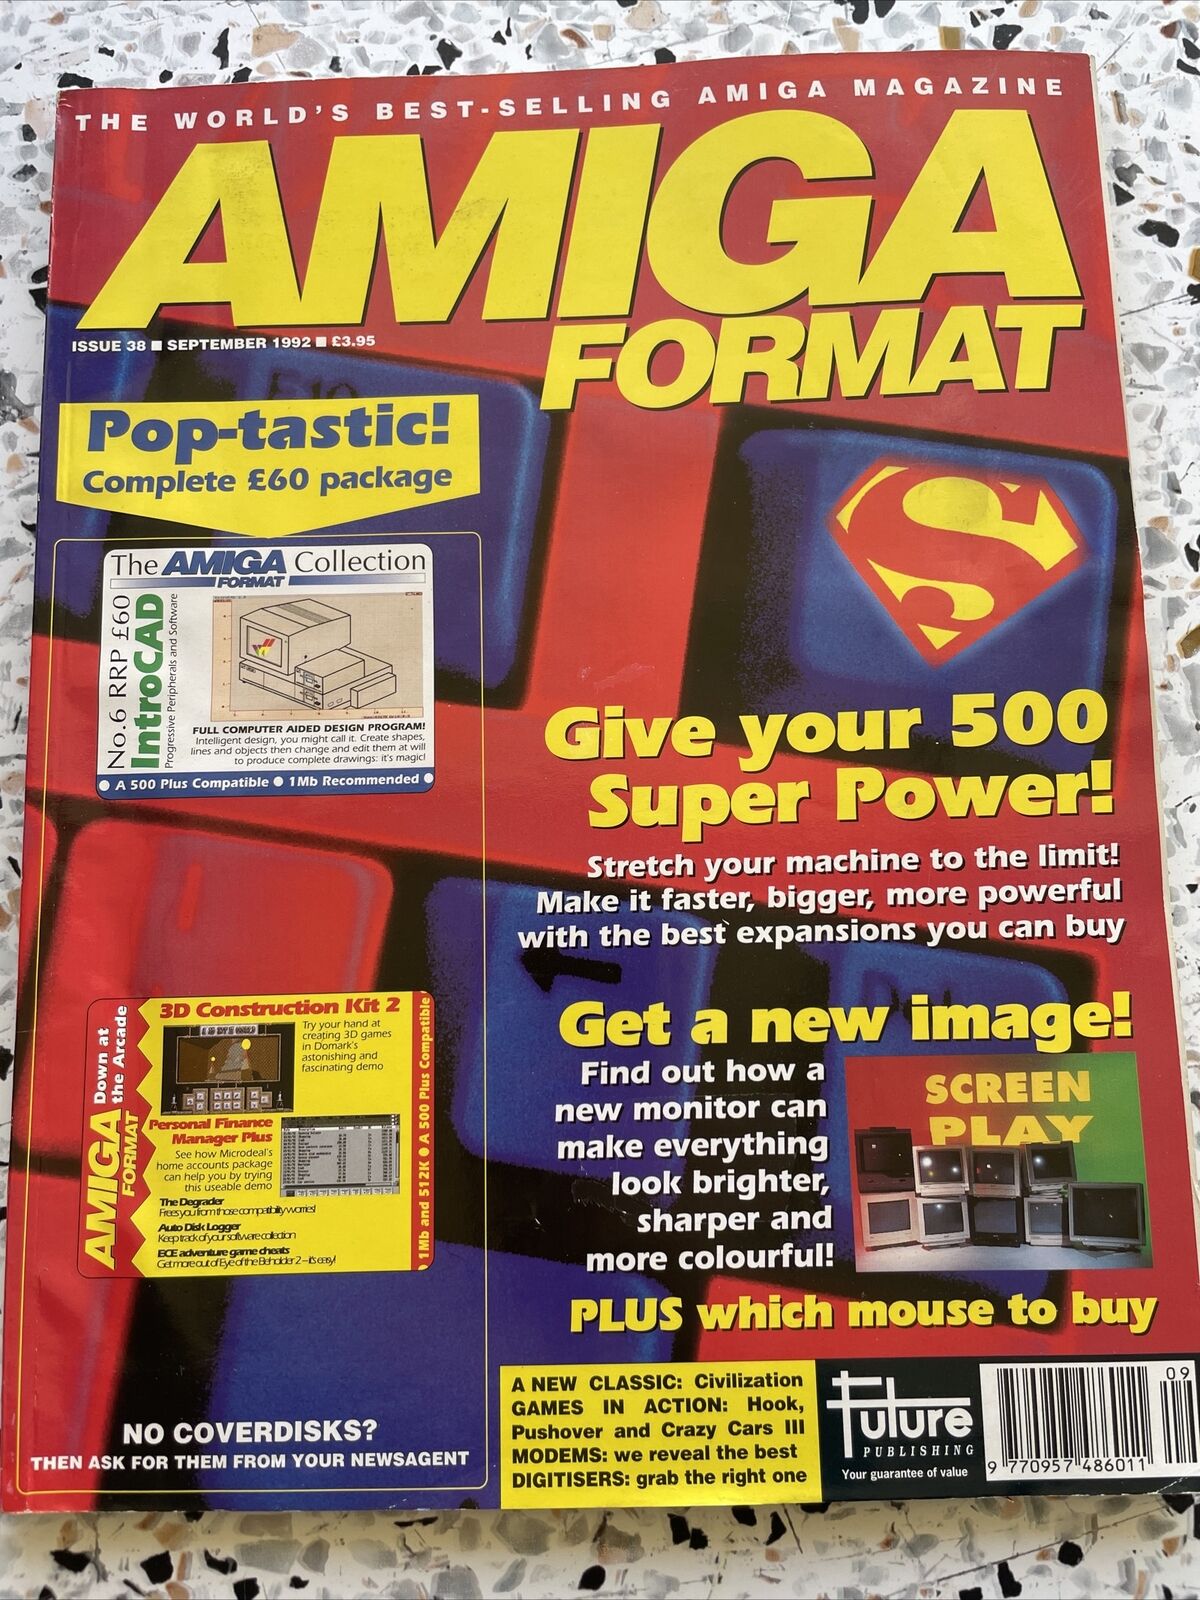 Lot of 5 Amiga Format Magazine Issues from 1991- 1993